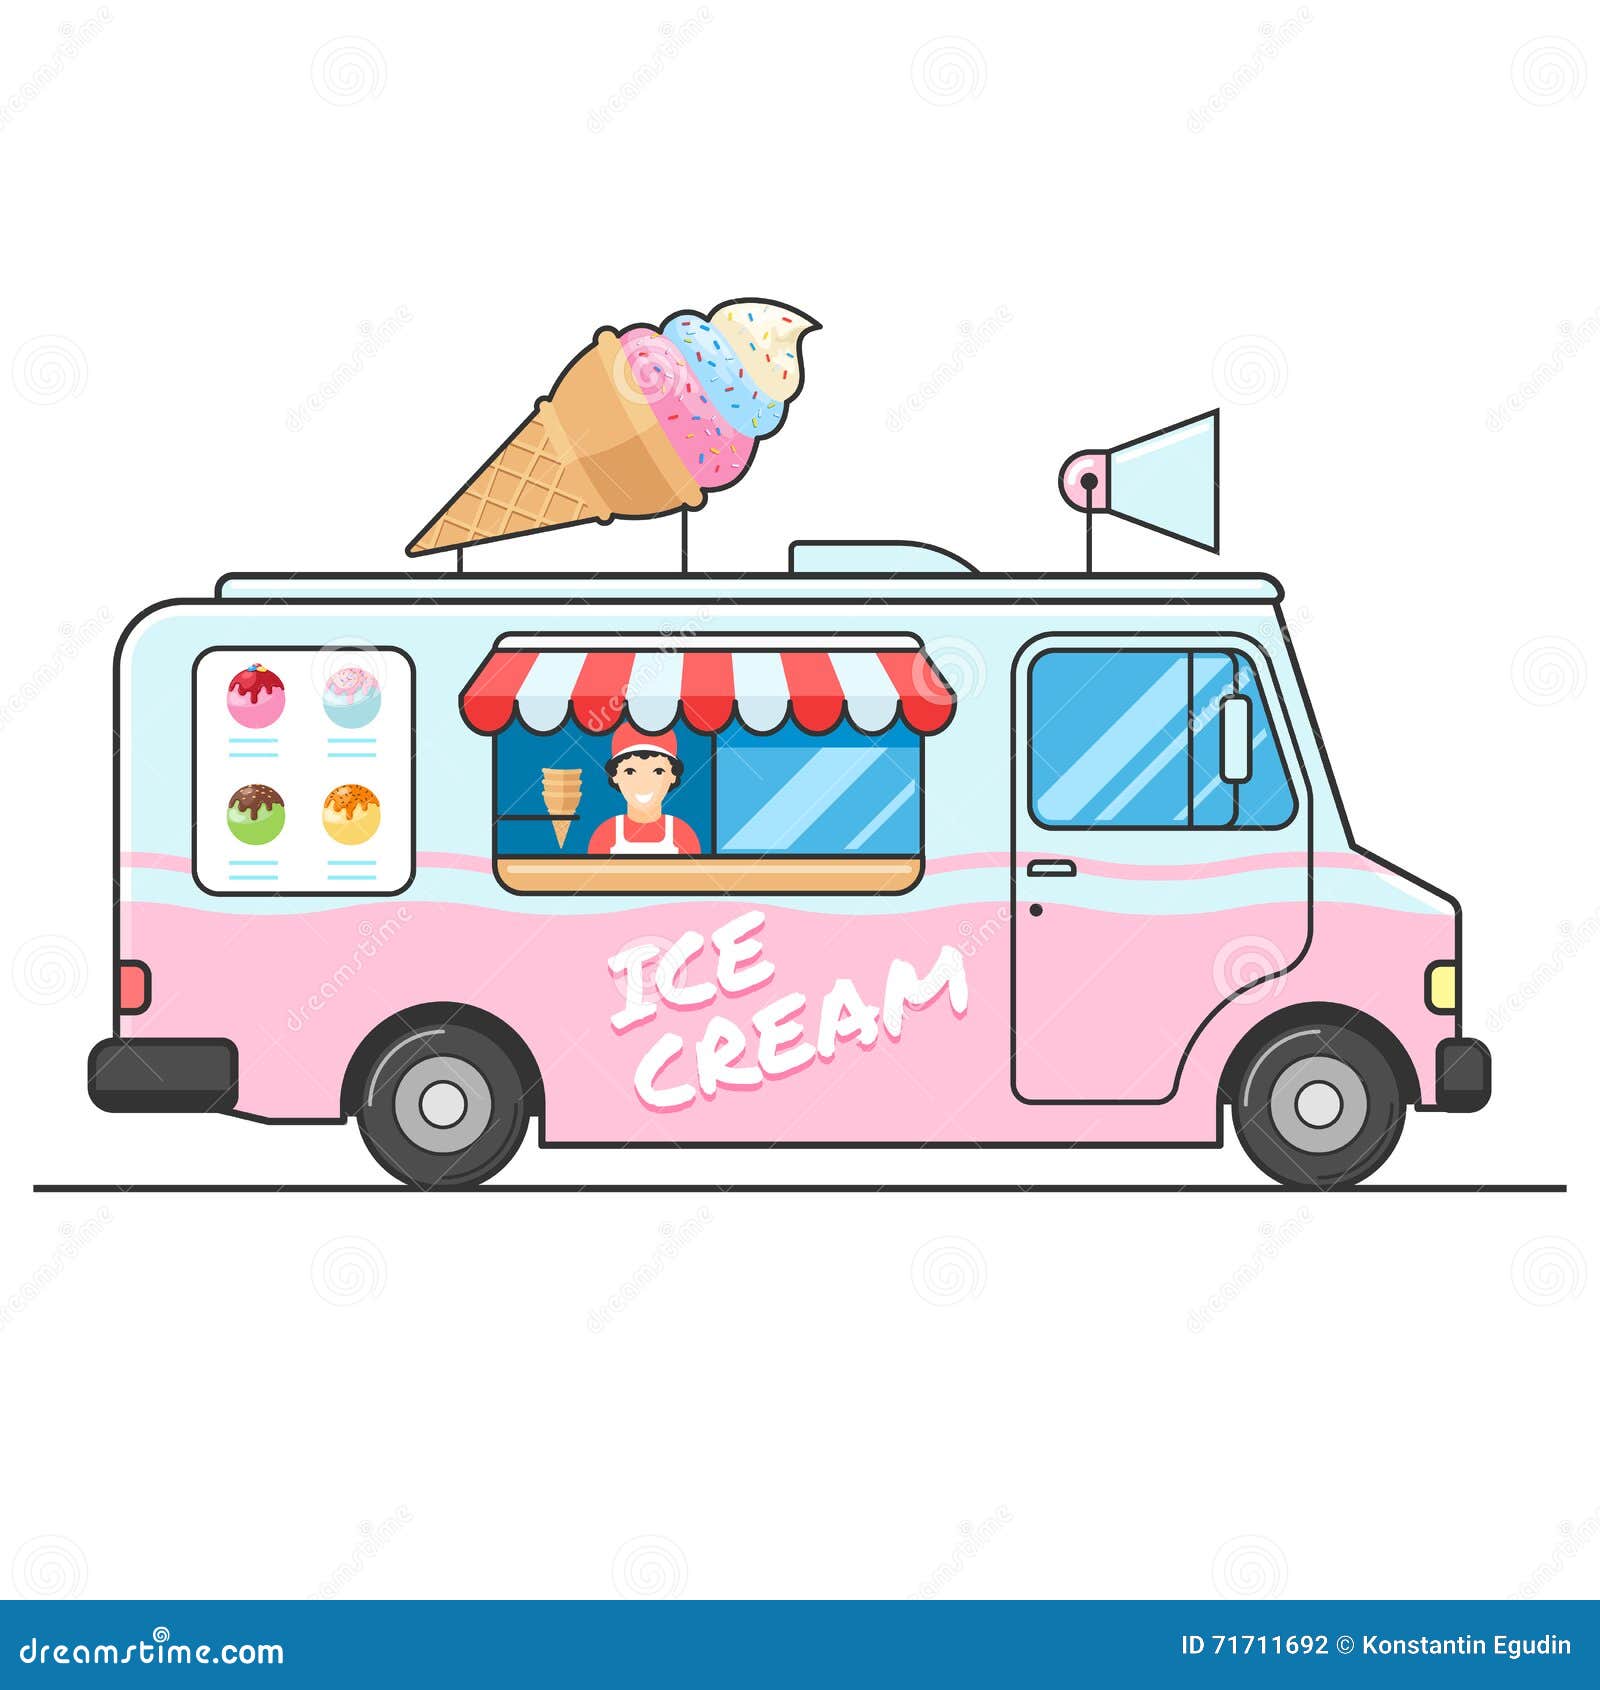 Premium Vector | Single oneline drawing side view of an ice cream truck  food truck concept continuous line drawing